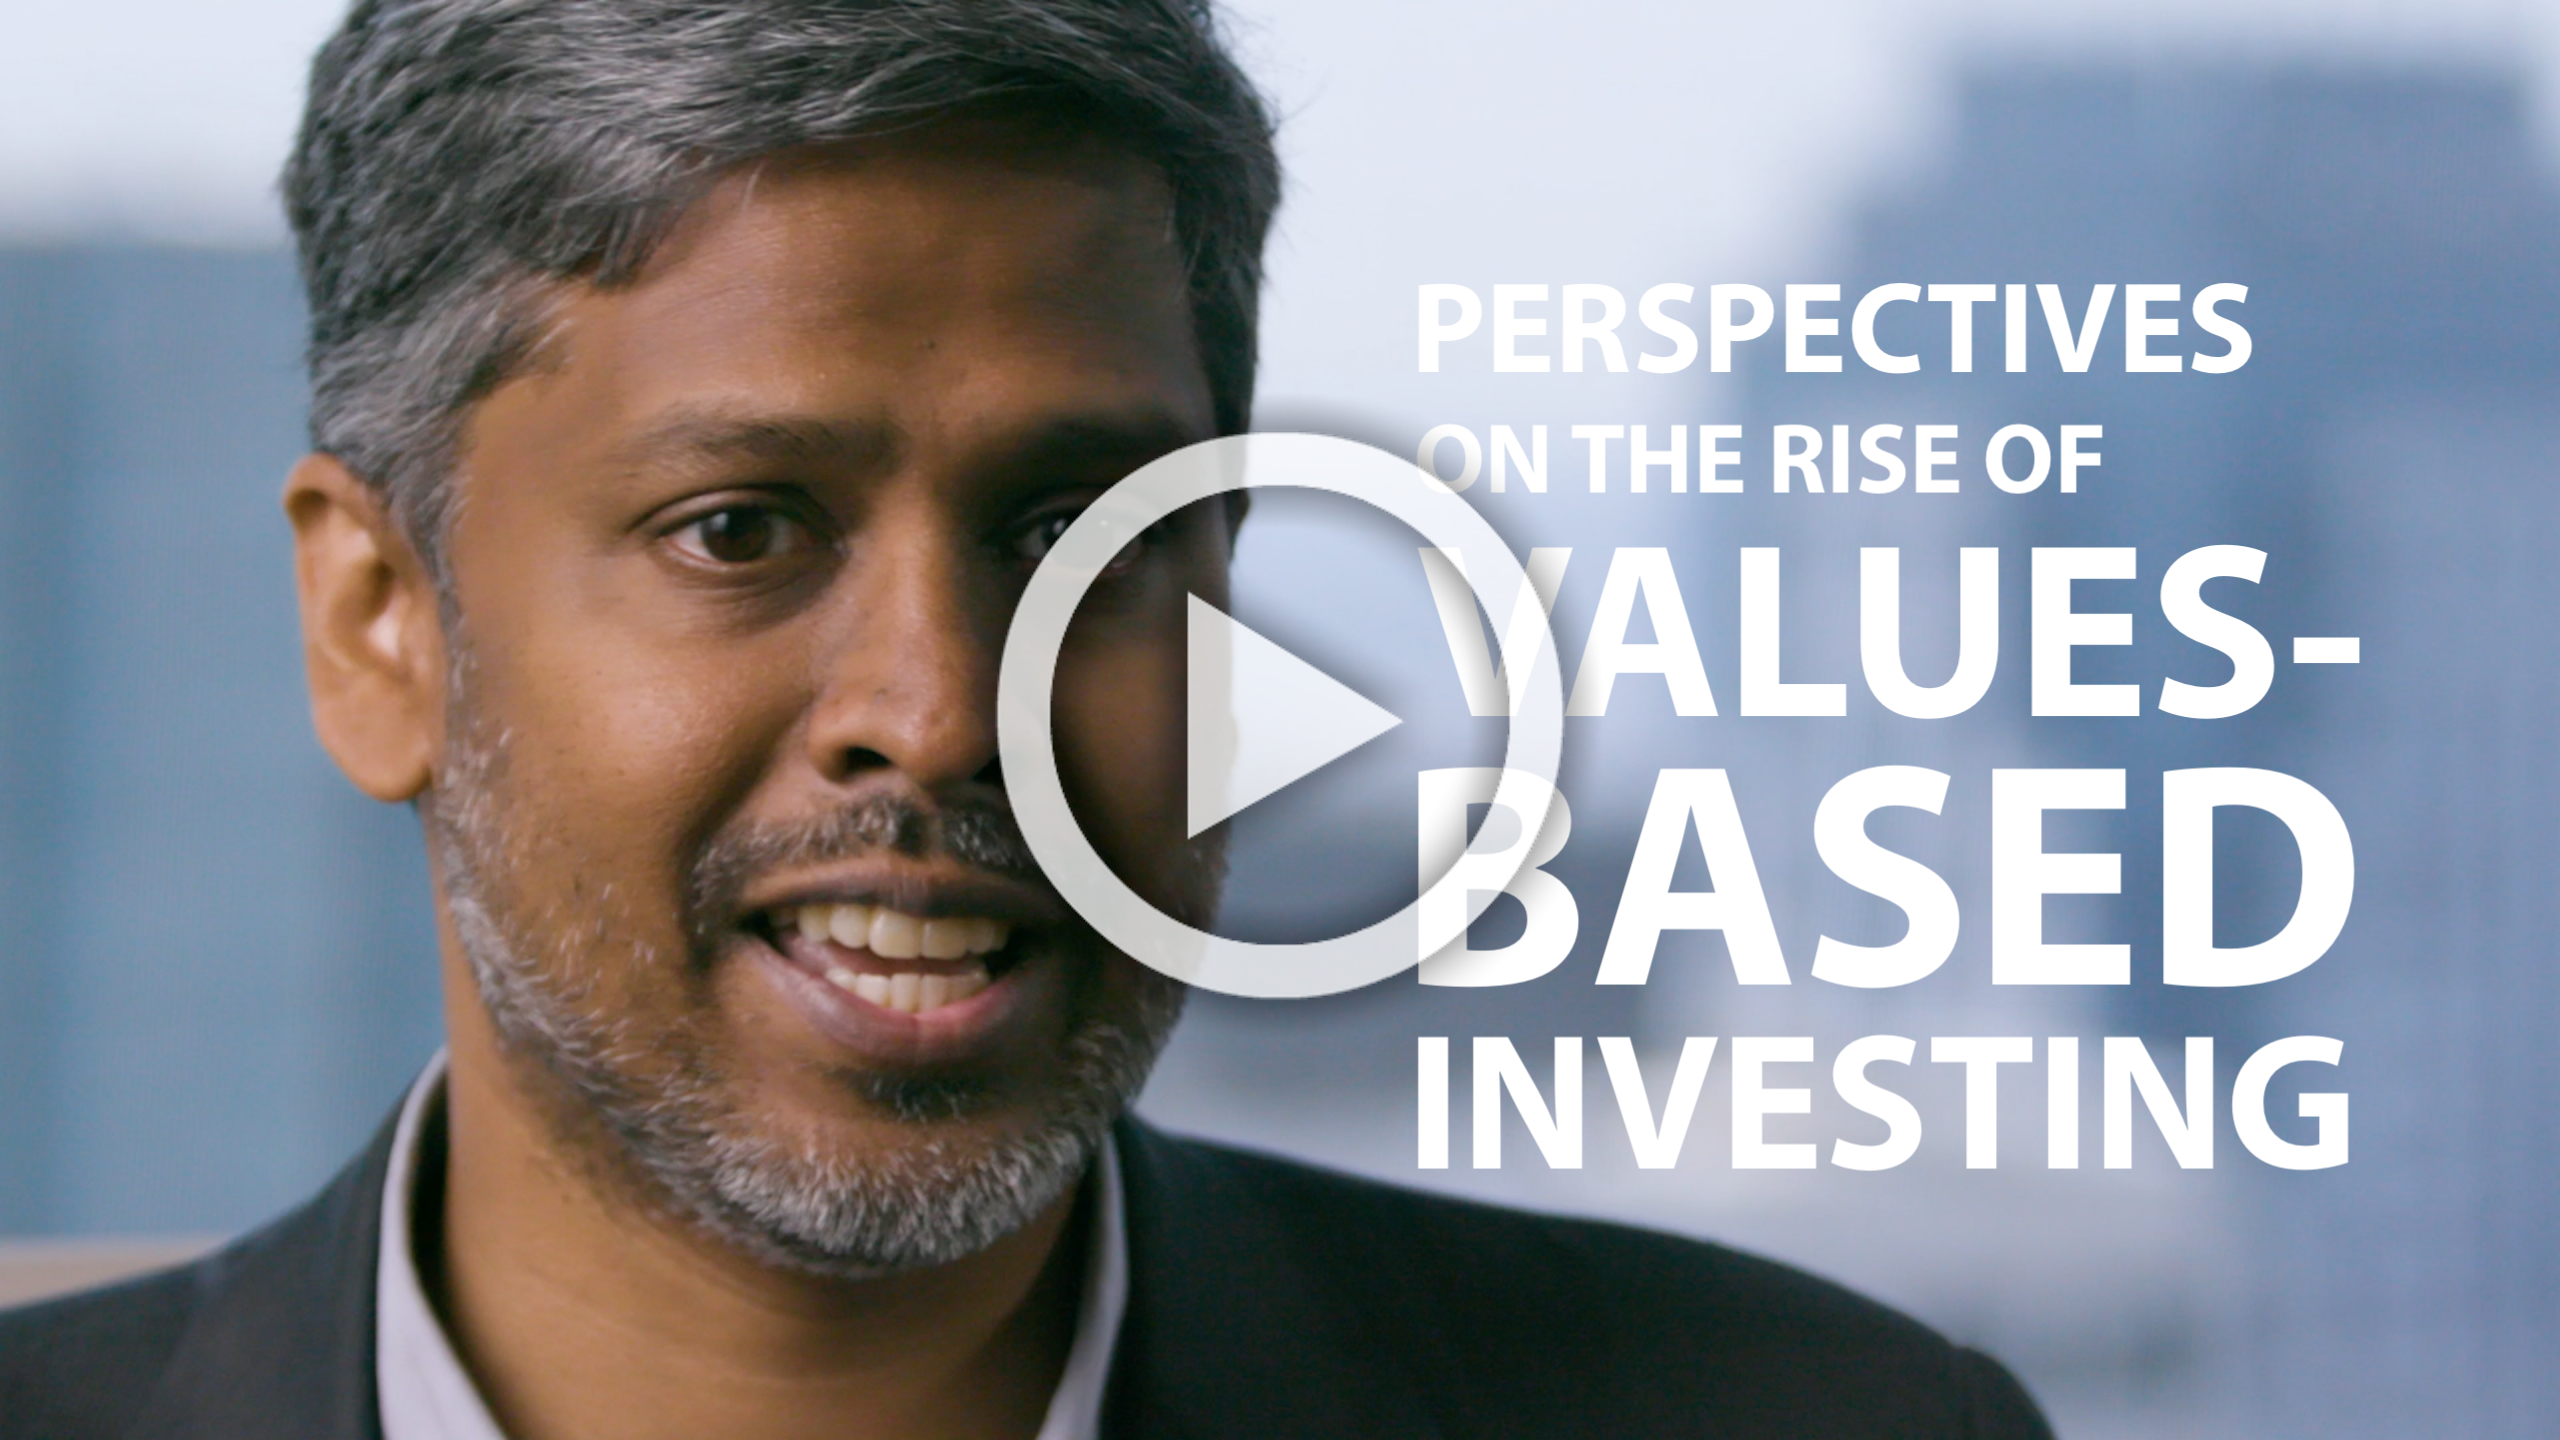 Perspectives on the rise of values-based investing